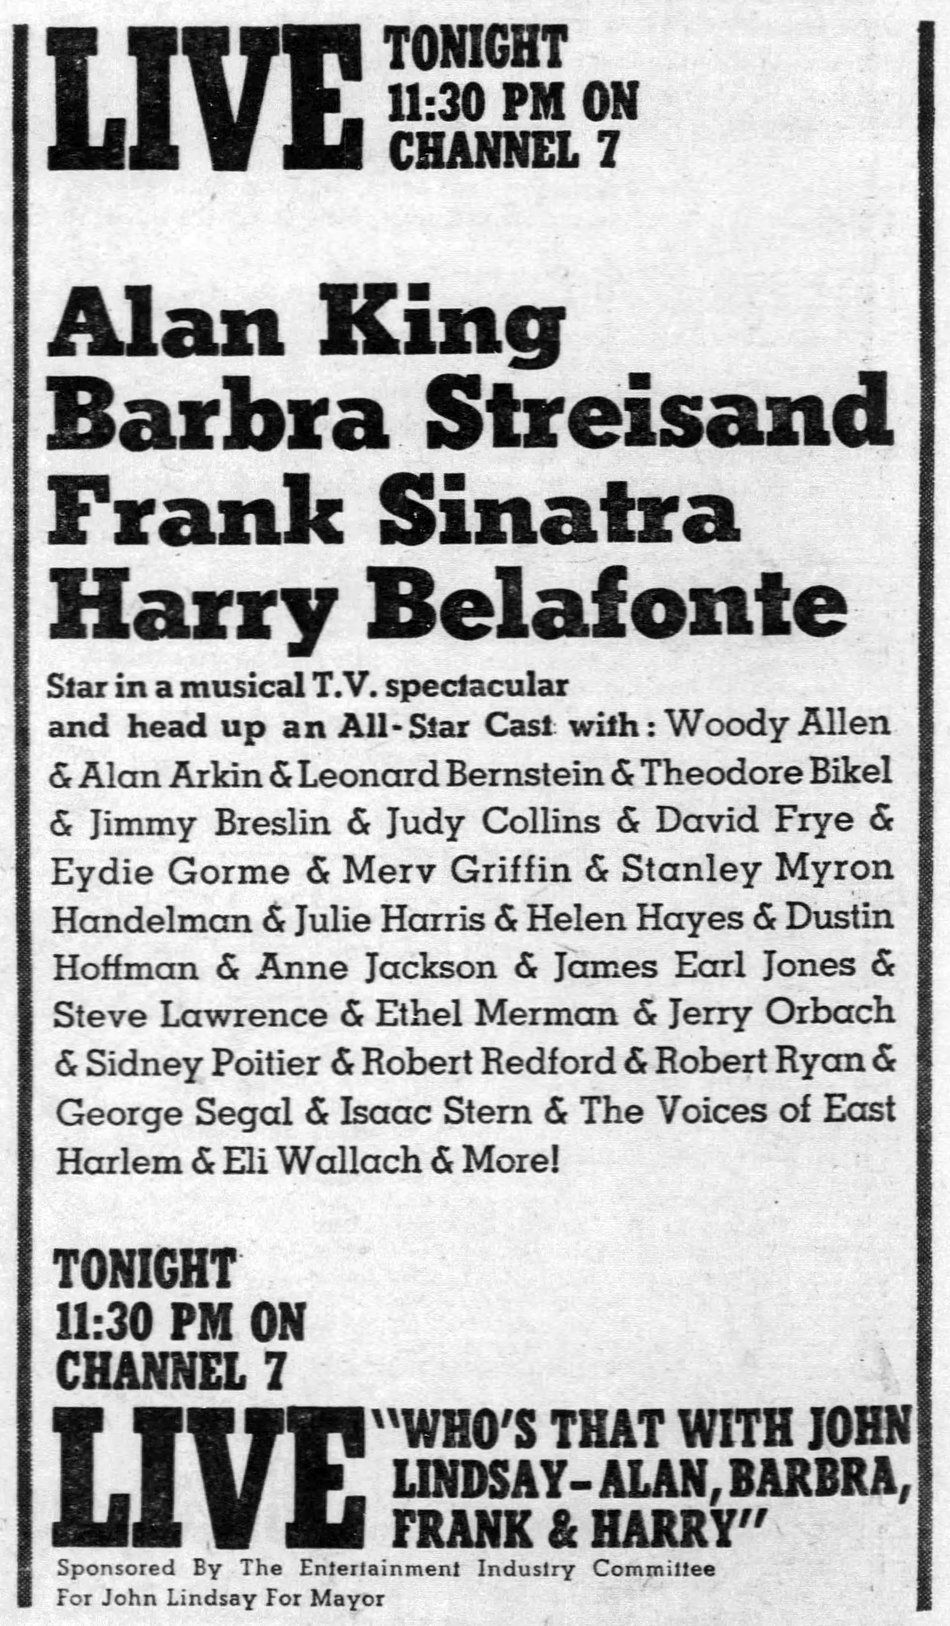 Newspaper ad for the television broadcast of the concert